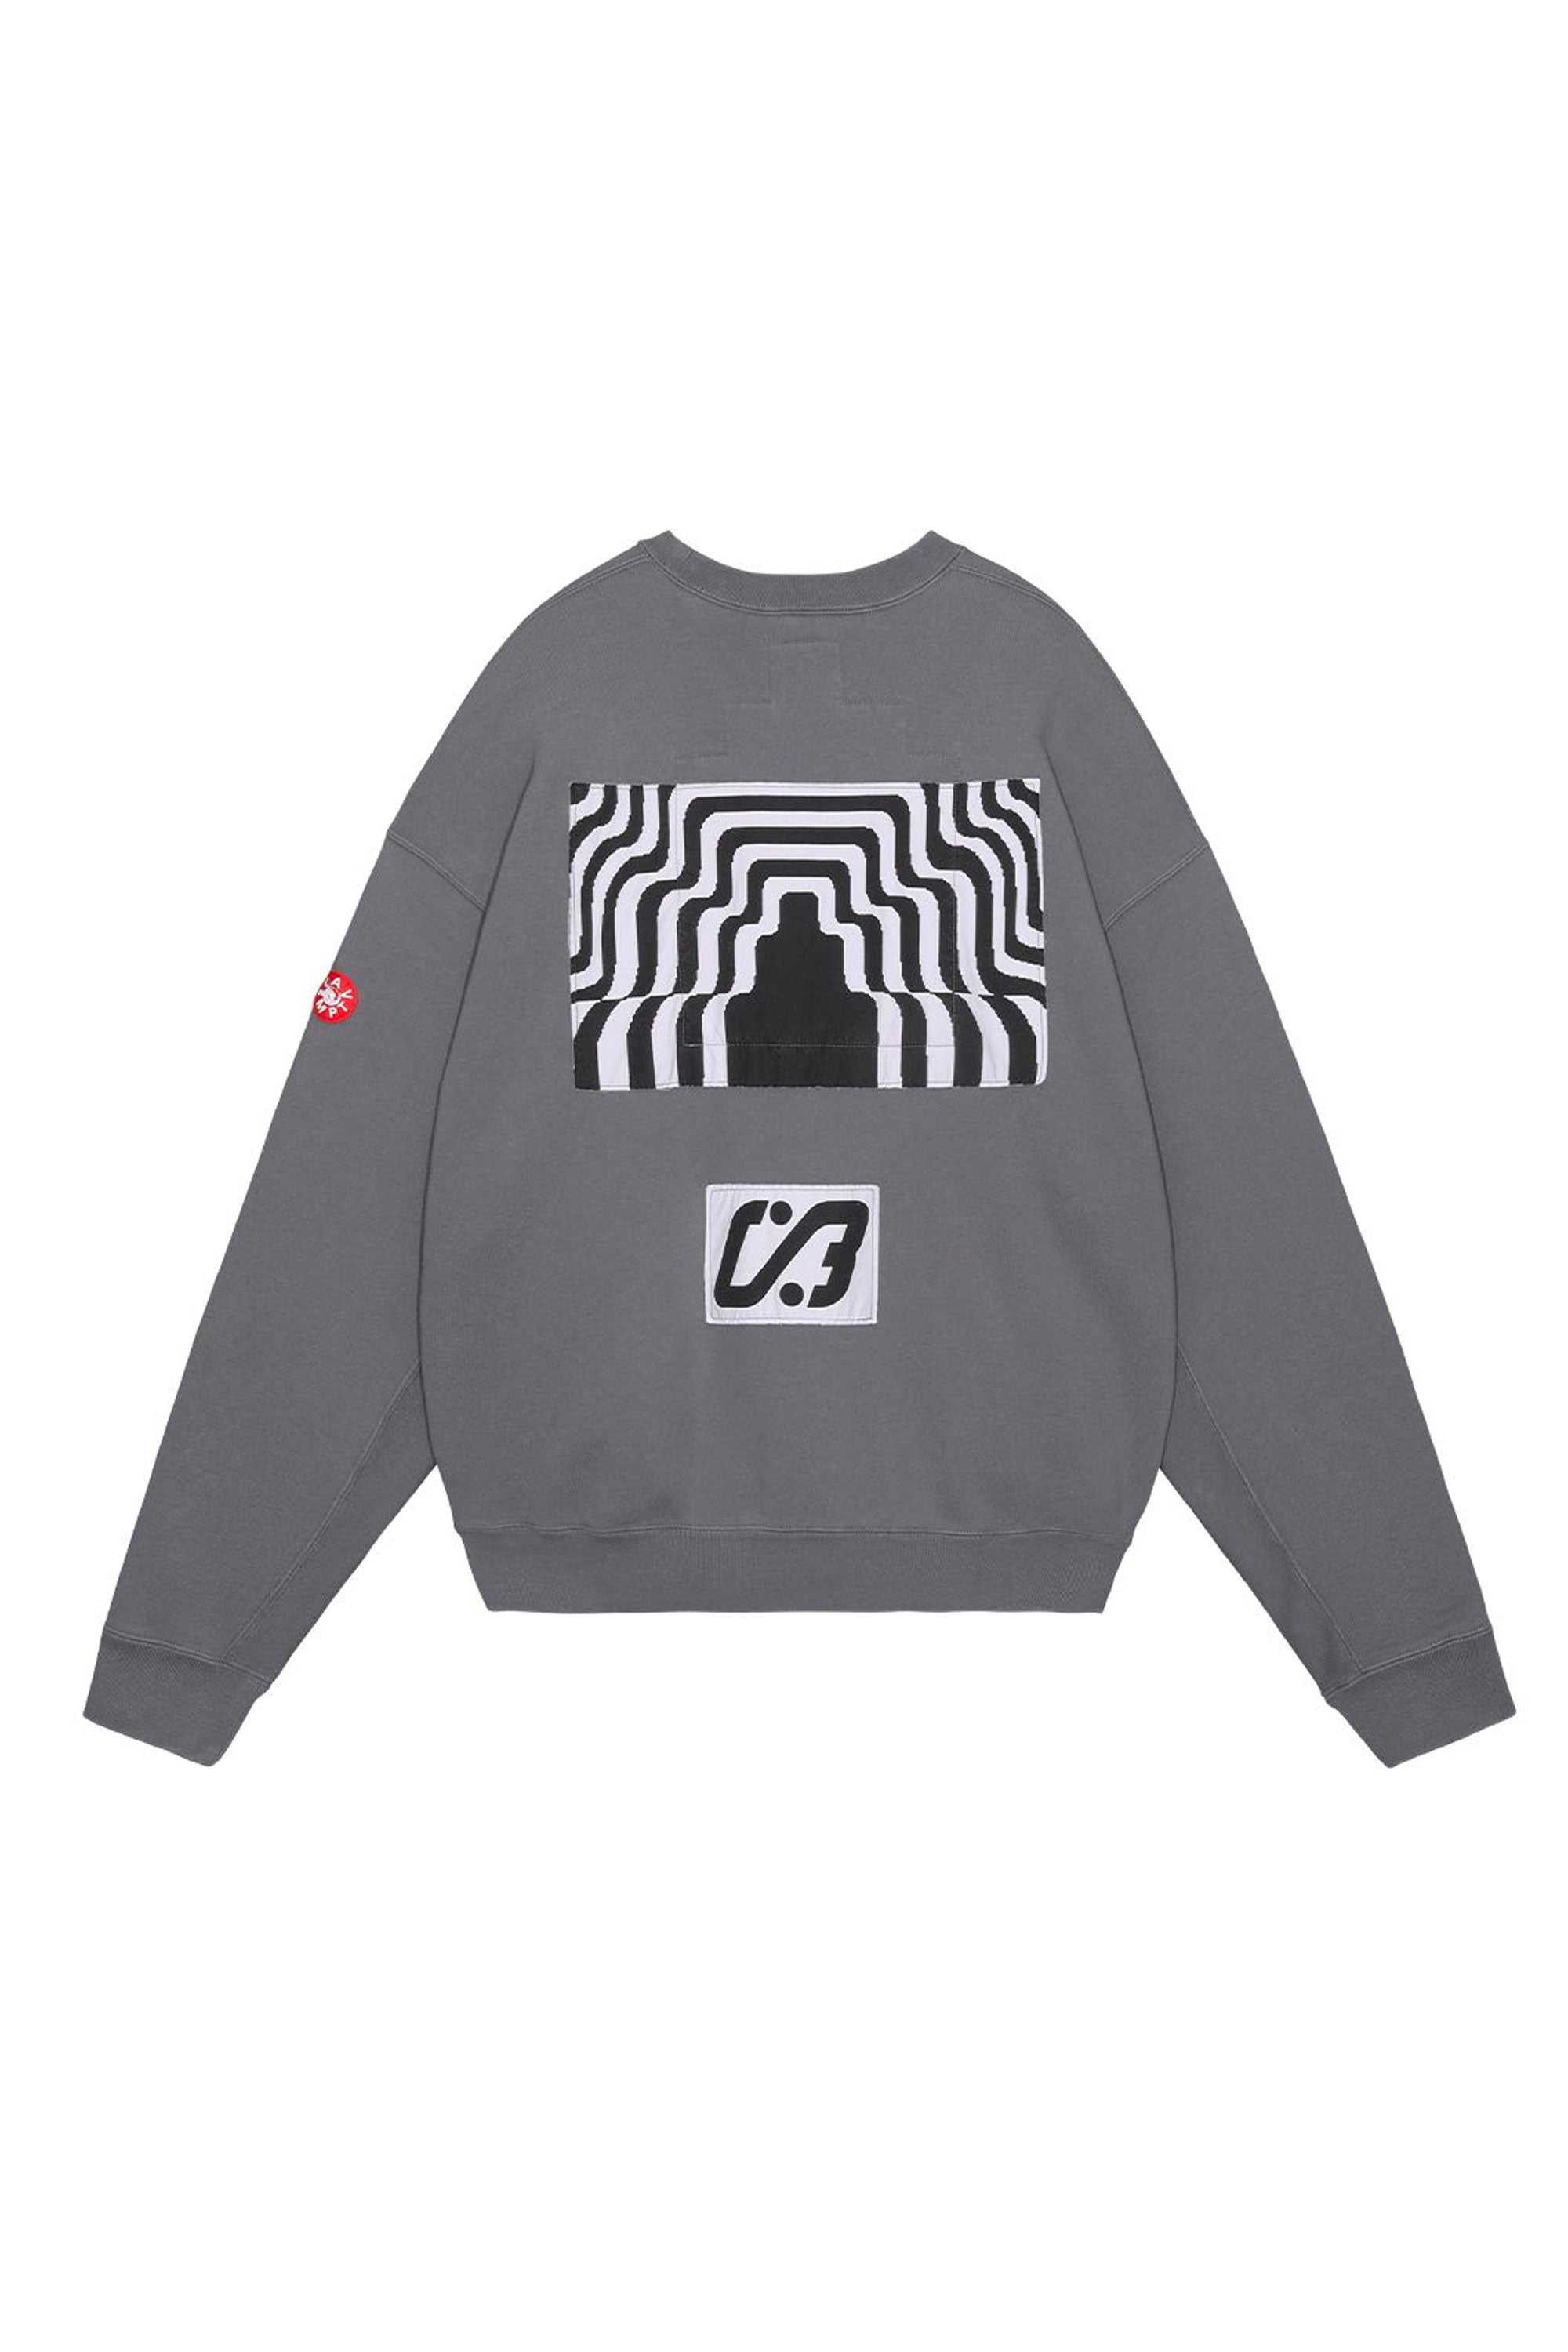 The CAV EMPT - WASHED AFTER EFFECT CREW NECK  available online with global shipping, and in PAM Stores Melbourne and Sydney.